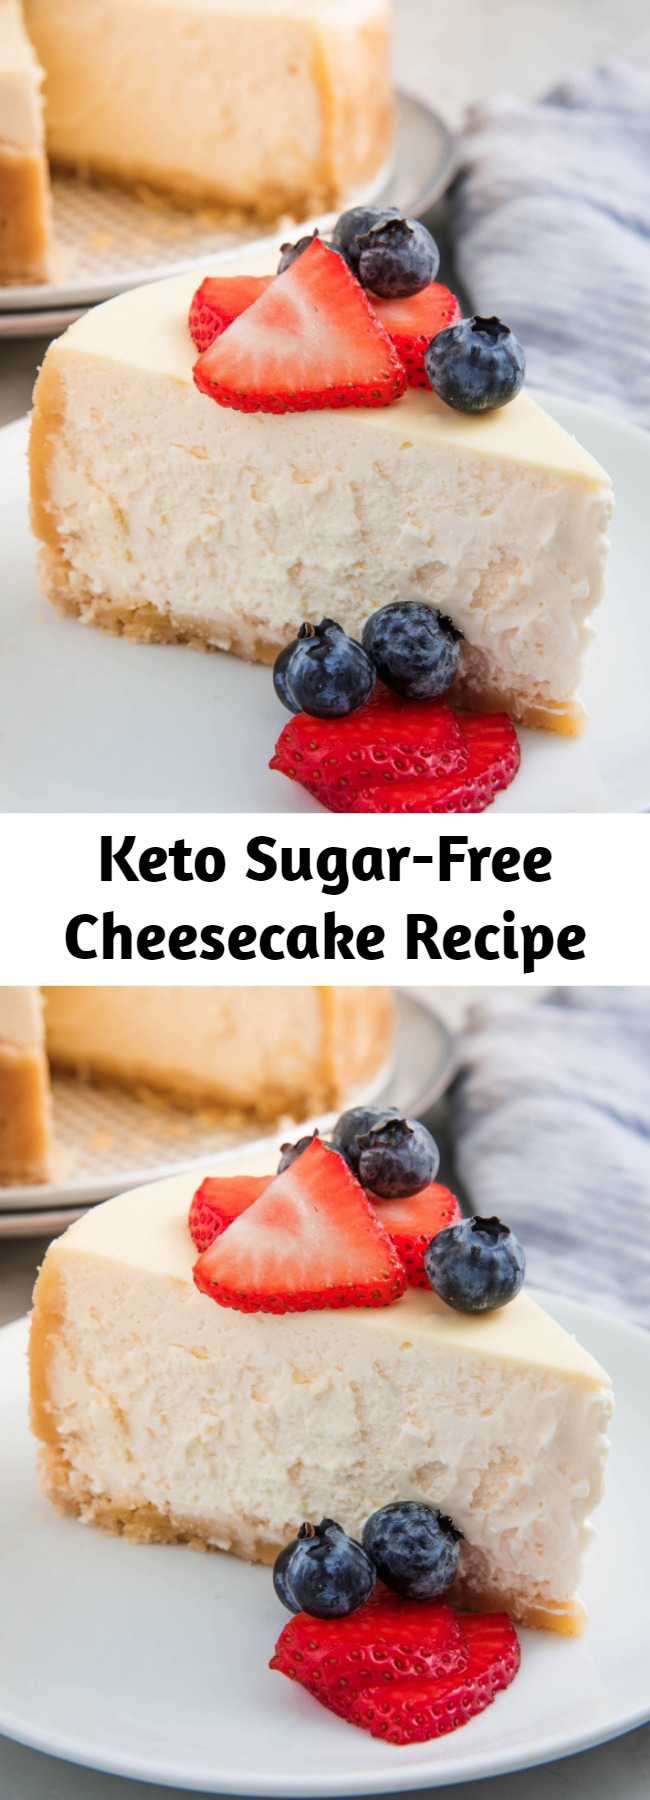 Keto Sugar-Free Cheesecake Recipe - Even if you aren't on a keto diet, you'll be amazed with this Keto Sugar-Free Cheesecake.